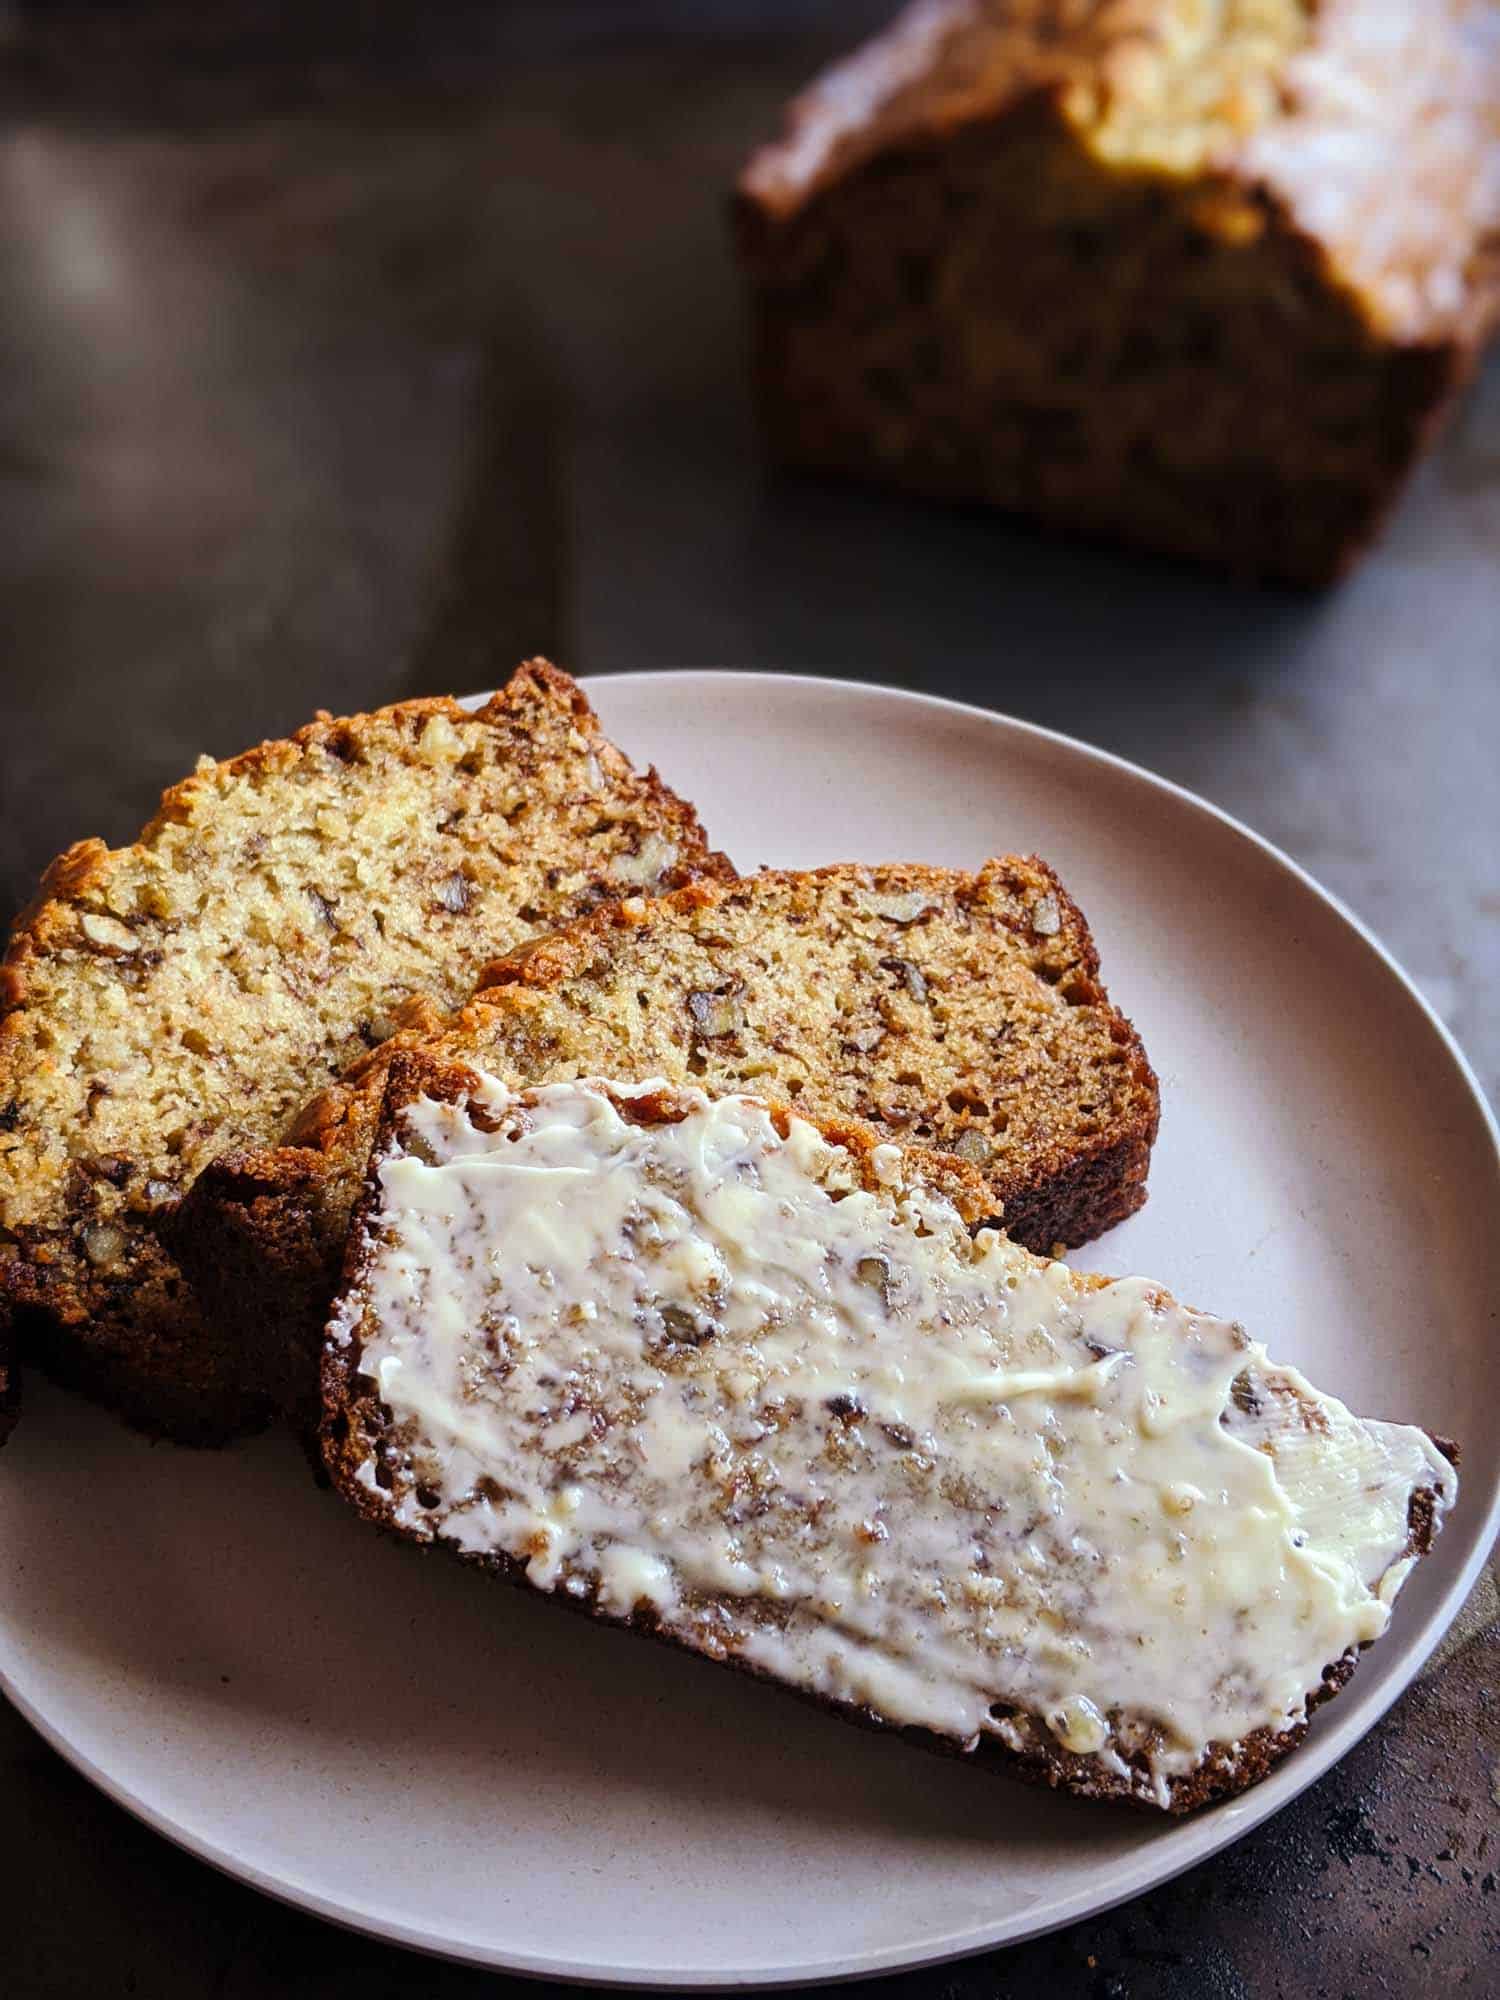 Old fashioned banana bread on a tray, one slice is buttered